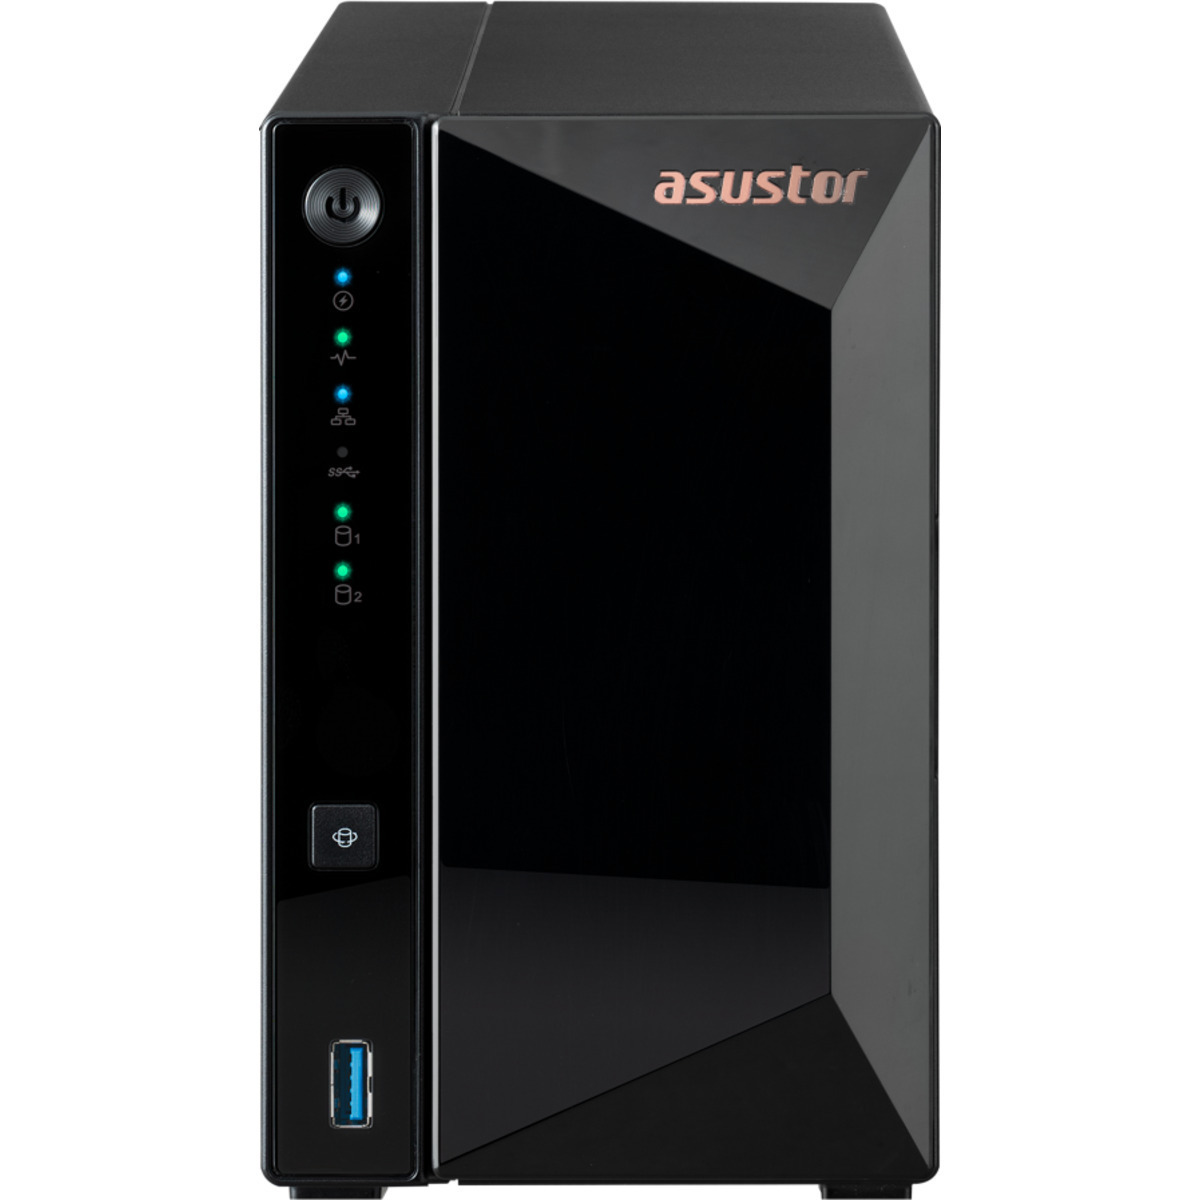 ASUSTOR DRIVESTOR 2 Pro Gen2 AS3302T v2 12tb 2-Bay Desktop Personal / Basic Home / Small Office NAS - Network Attached Storage Device 2x6tb Seagate IronWolf Pro ST6000NT001 3.5 7200rpm SATA 6Gb/s HDD NAS Class Drives Installed - Burn-In Tested - ON SALE DRIVESTOR 2 Pro Gen2 AS3302T v2